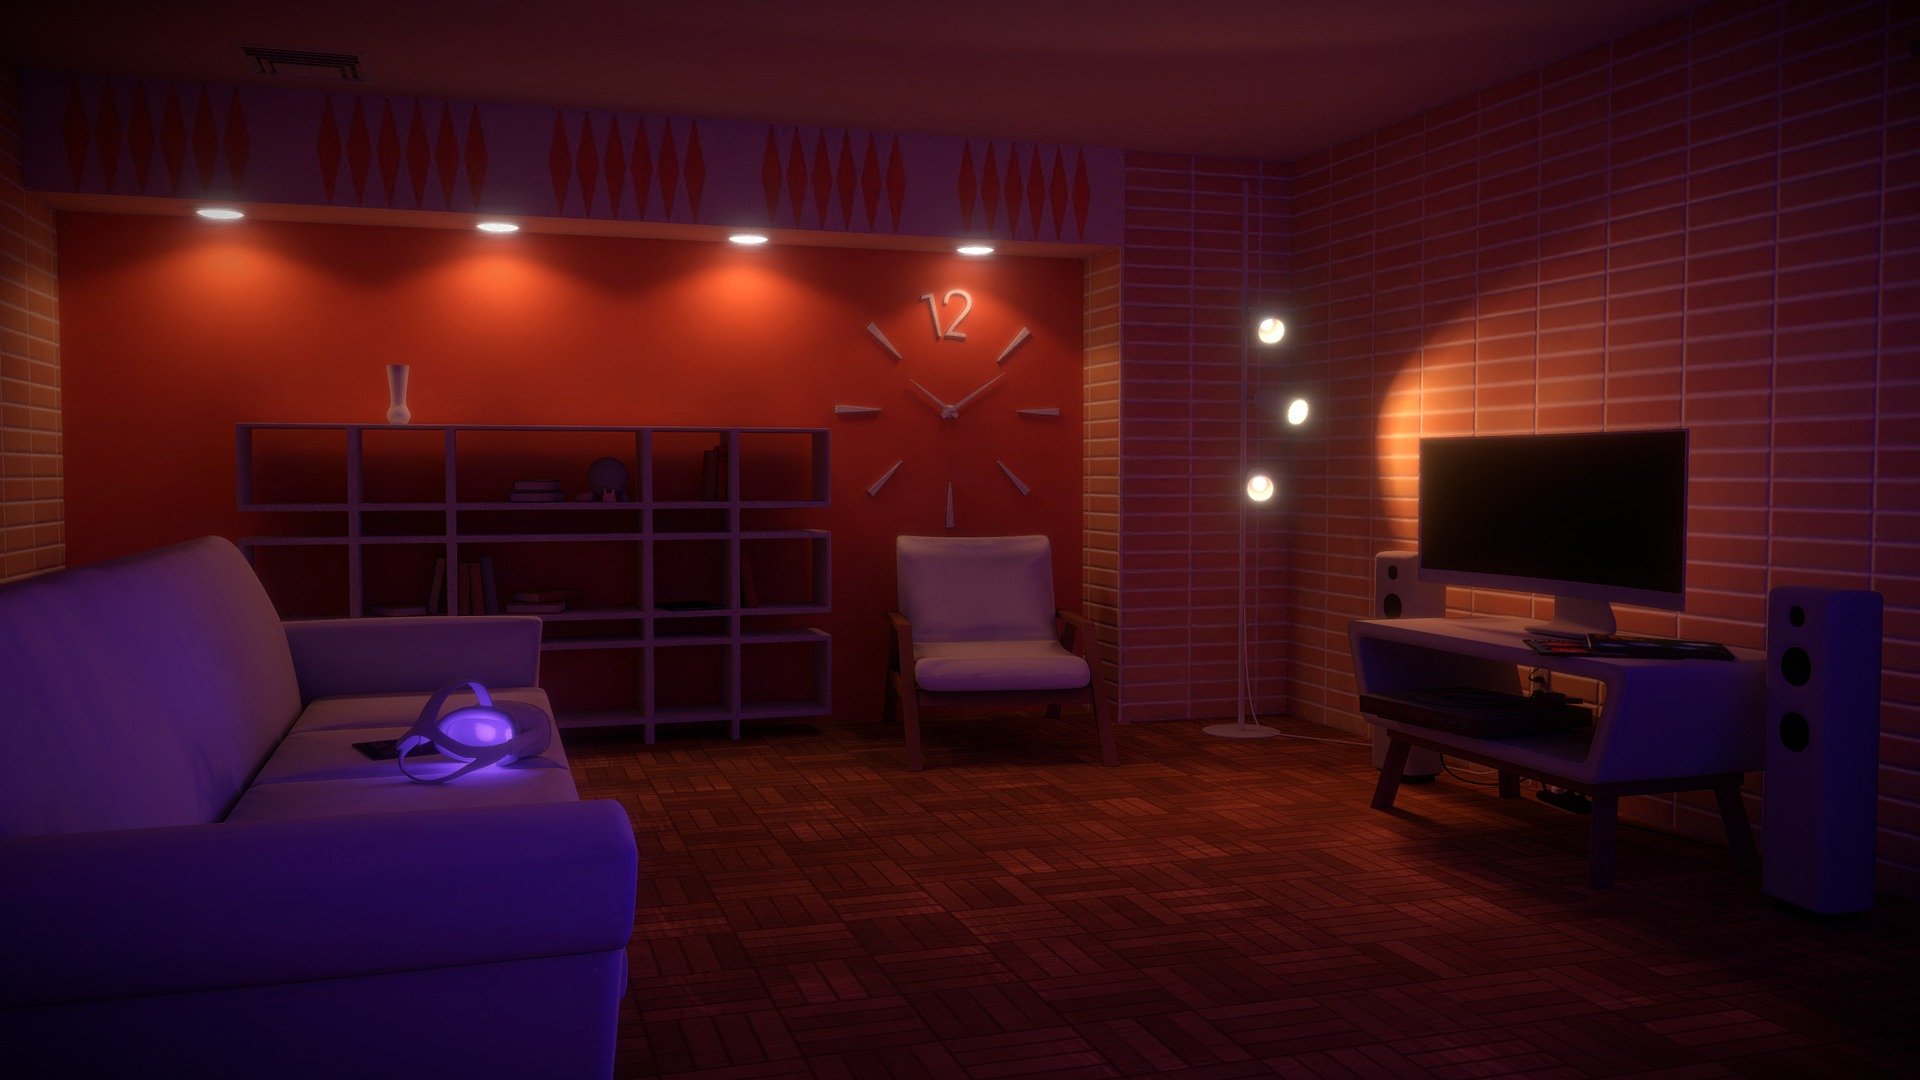 Note: The base unlit Blender scene is also available as an additional file, ideal for editing and custom lighting scenarios.

Visit a warm, contemporary high-rise apartment on a cool night.  Features a TV set, record player, bookshelf, VR headset, magazines, sofa, armchairs and a balcony/city view.  As the scene was also ported to (and is available on) the SteamVR workshop, it is to-scale and created with performance in mind.  Scene lighting is baked into three composite textures.

Get similar assets here: https://skfb.ly/onBGI - High-Rise Mid-Century Apartment Room for VR - Buy Royalty Free 3D model by LoneDeveloper 3d model